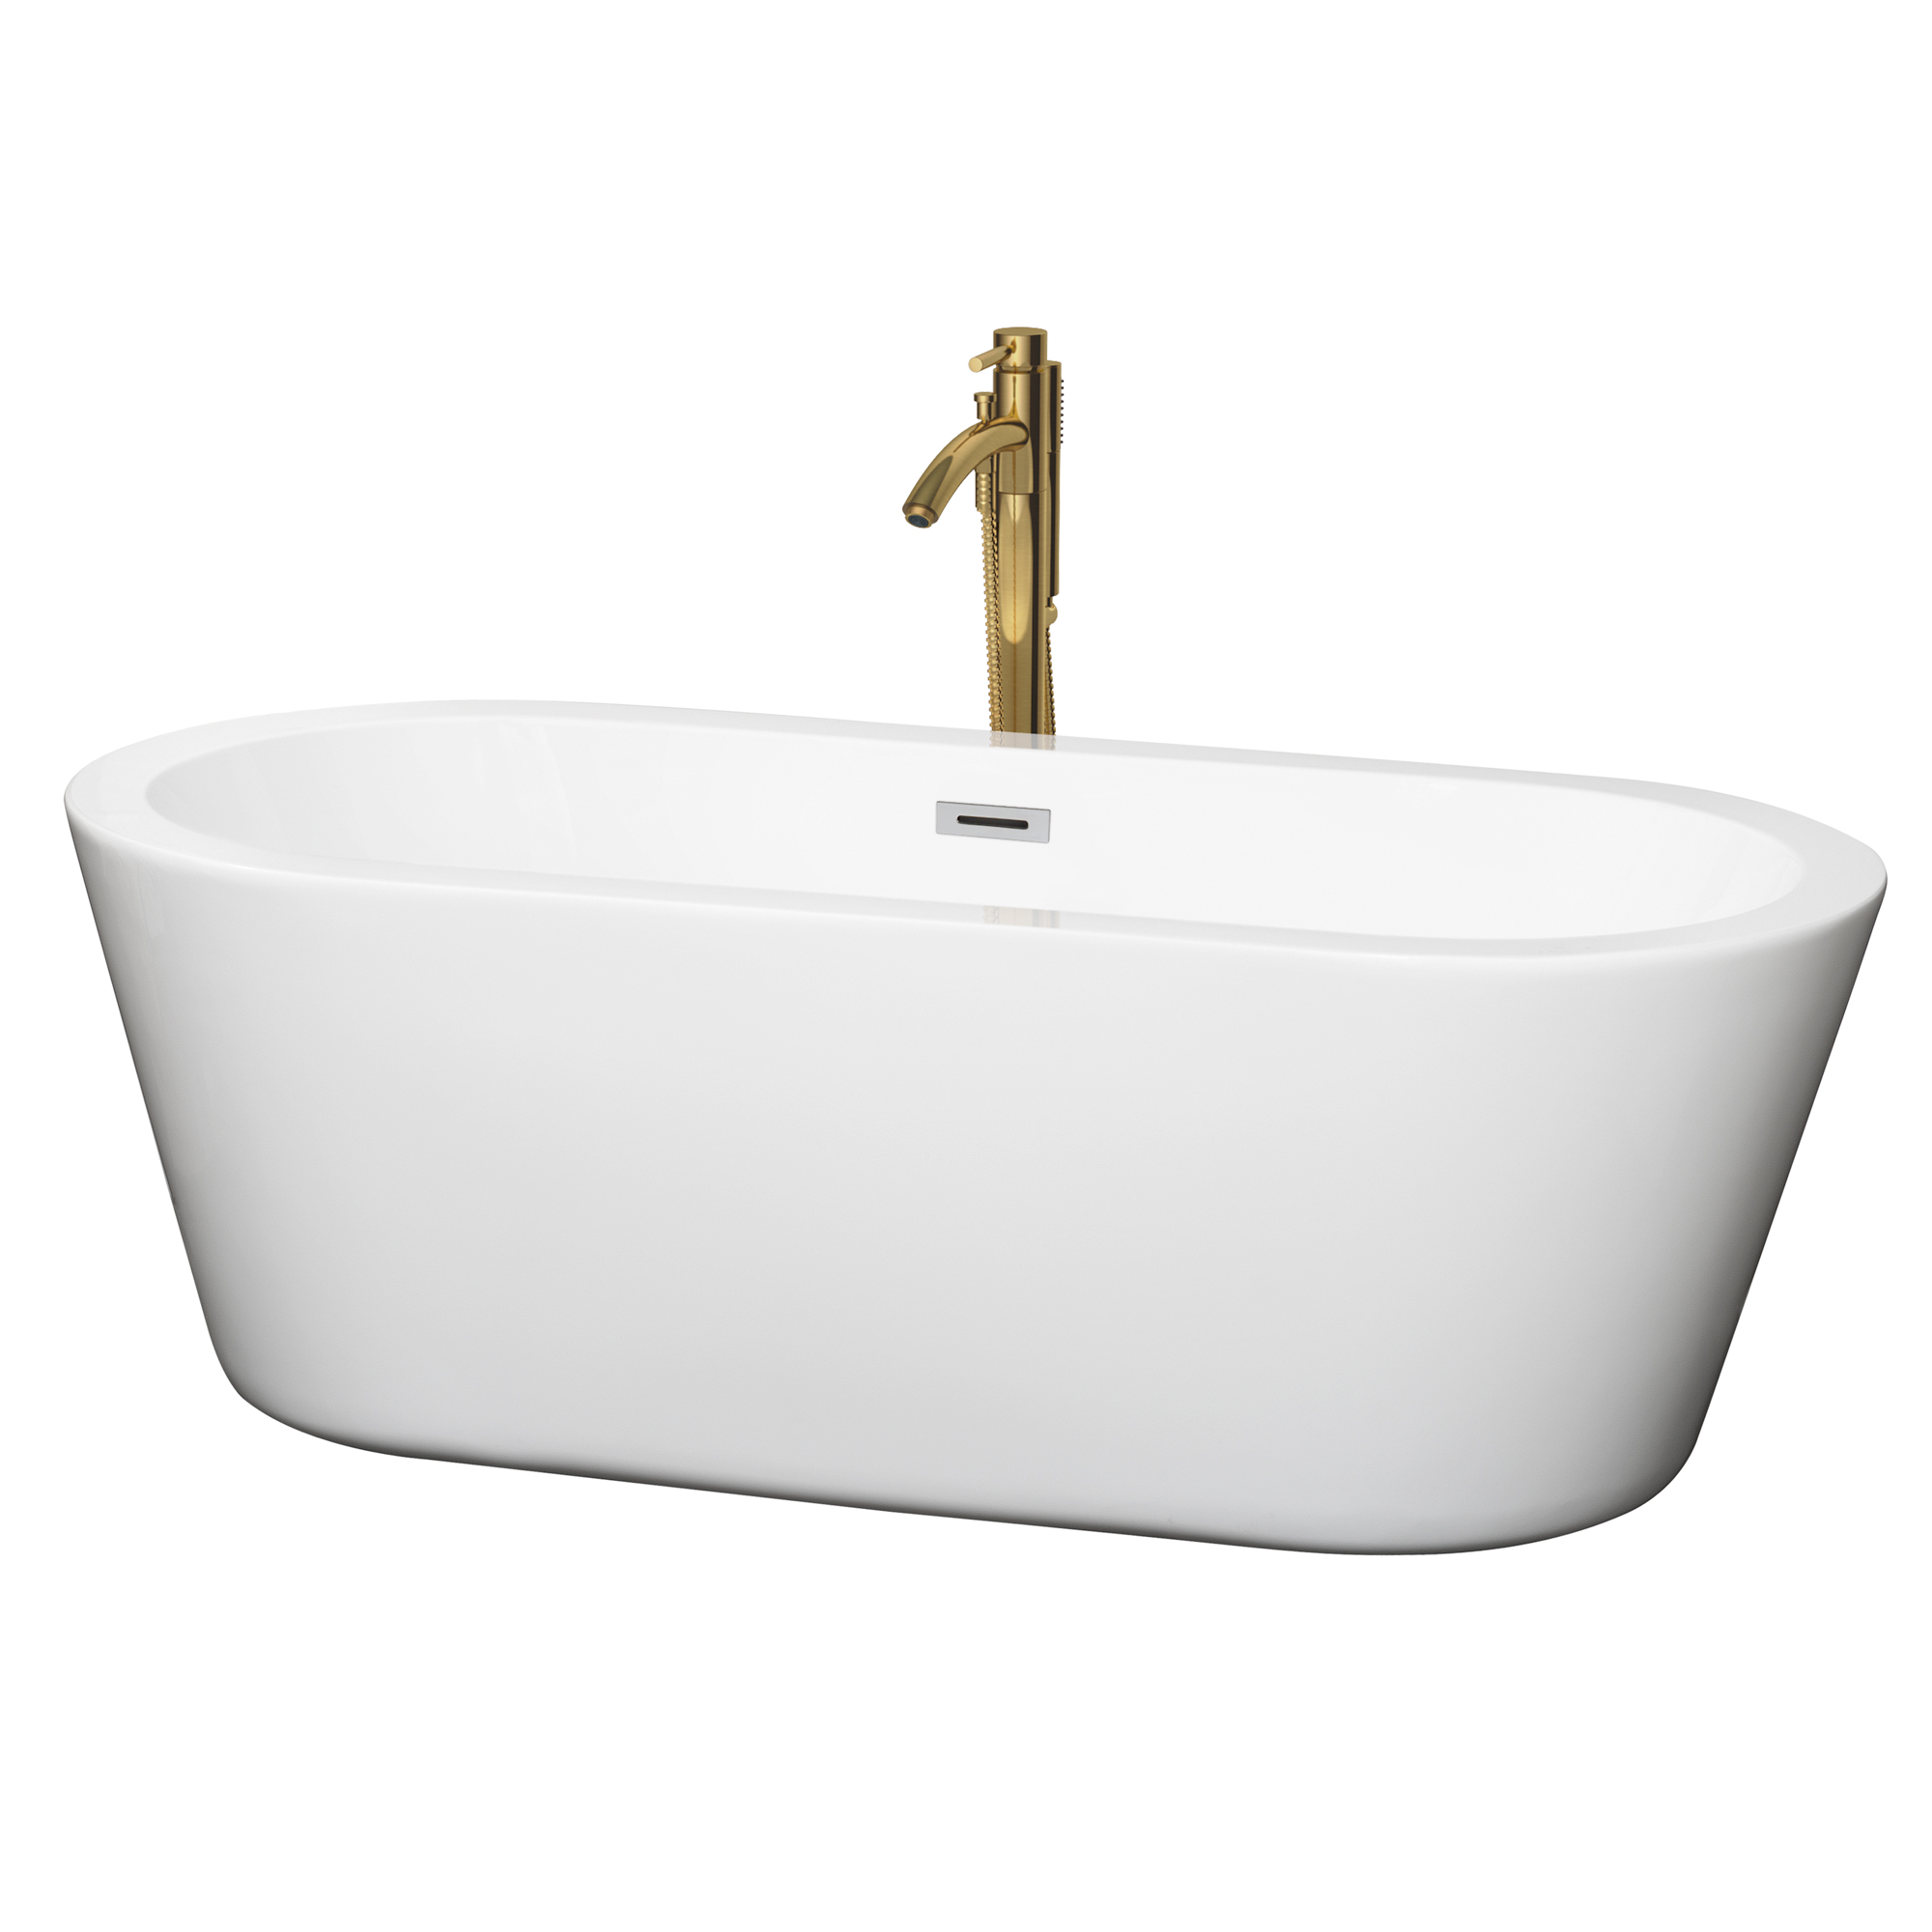 67" Freestanding Bathtub in White with Floor Mounted Faucet in Brushed Gold and Polished Chrome Trim